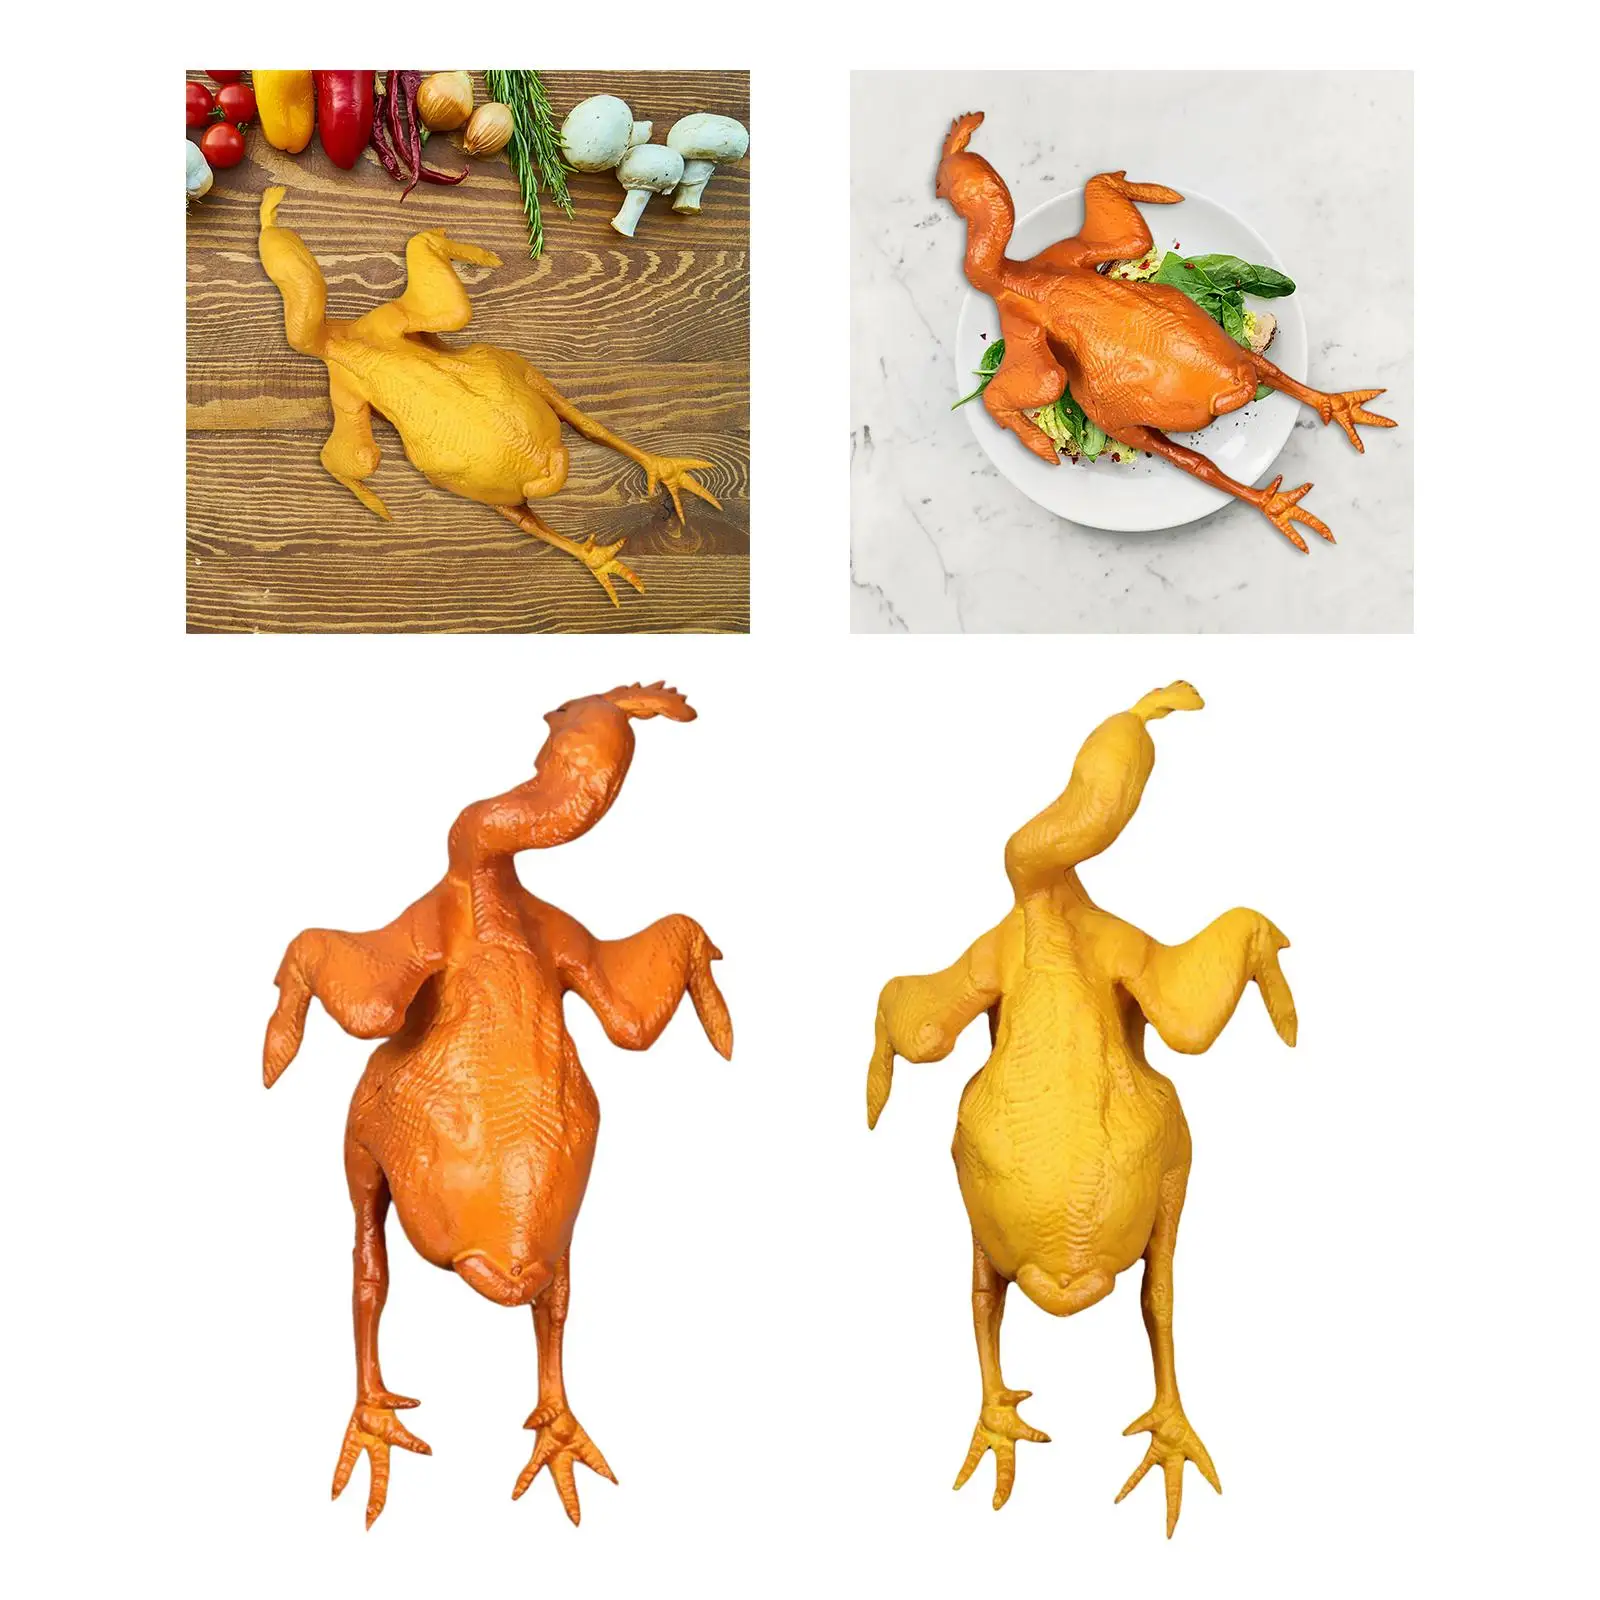 Roast Chicken Model Fake Food Photography Props for Dining Table Decoration